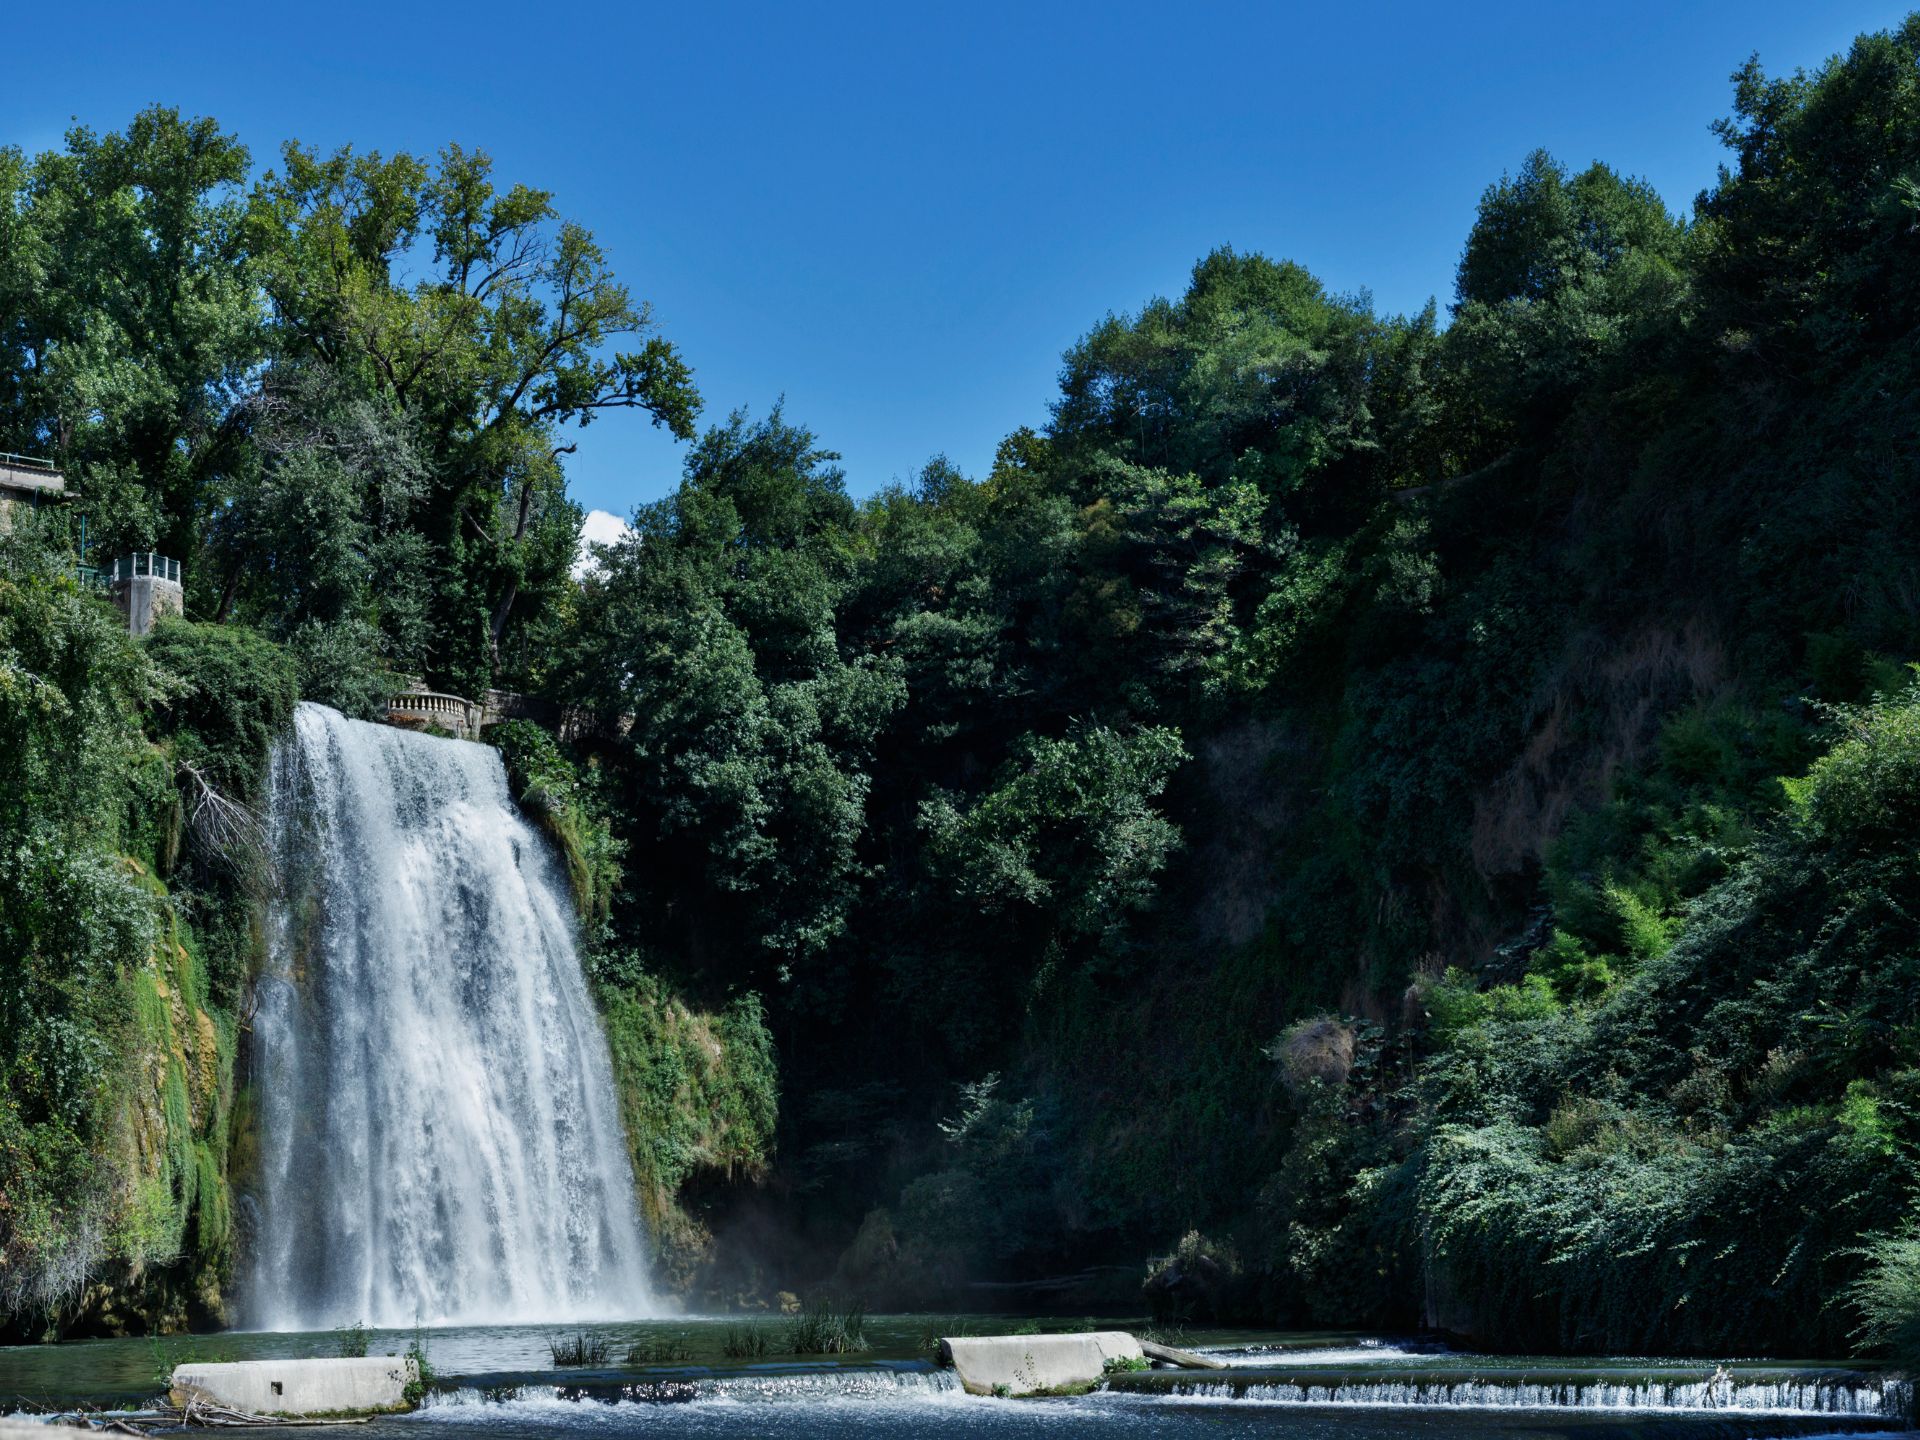 Discovering the Waterfalls of Isola Liri